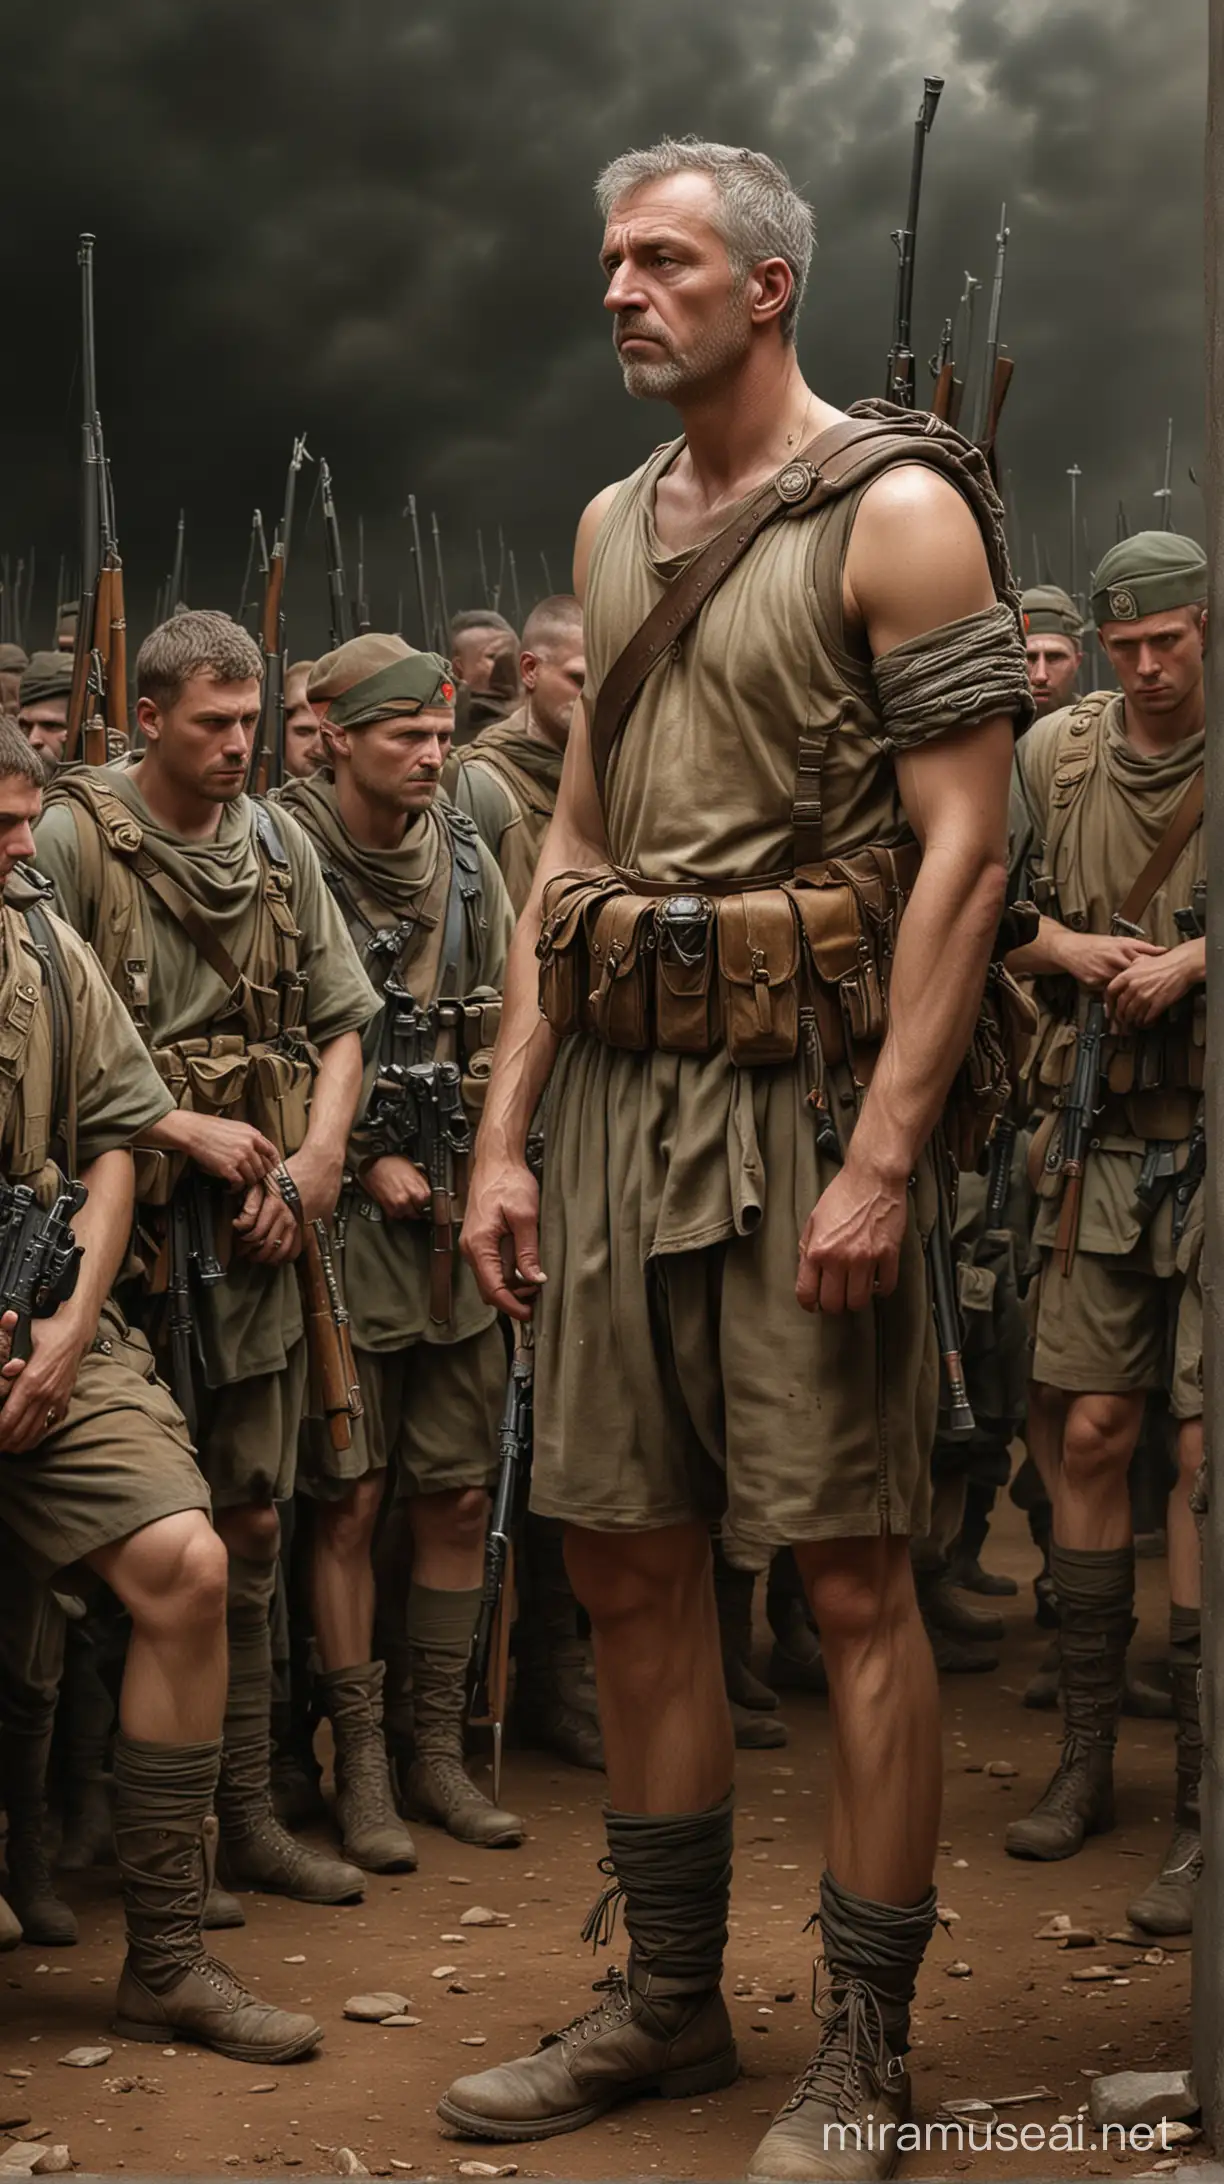 Childers' stoic demeanor contrasting with the apprehension of the soldiers. hyper realistic